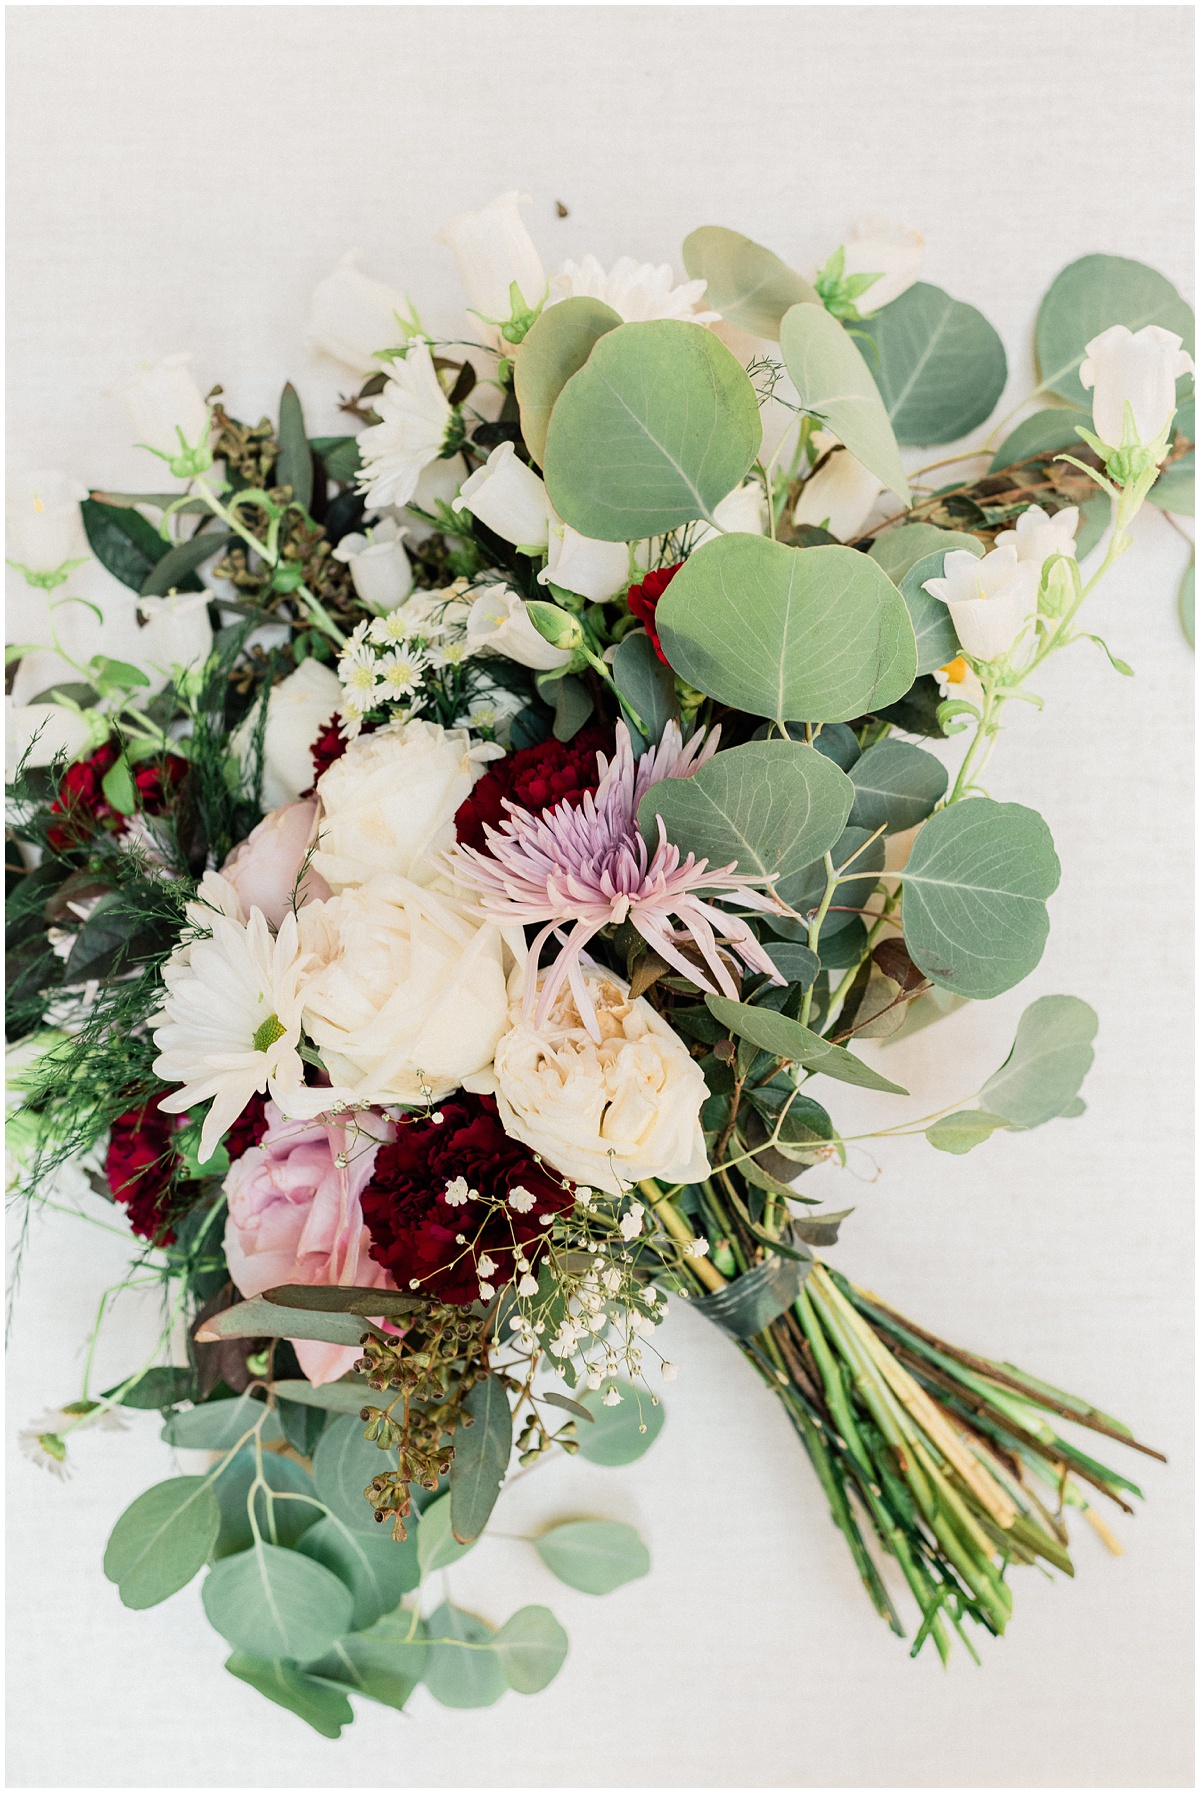 Bridal bouquet with maroon, dusty rose and eucalyptus